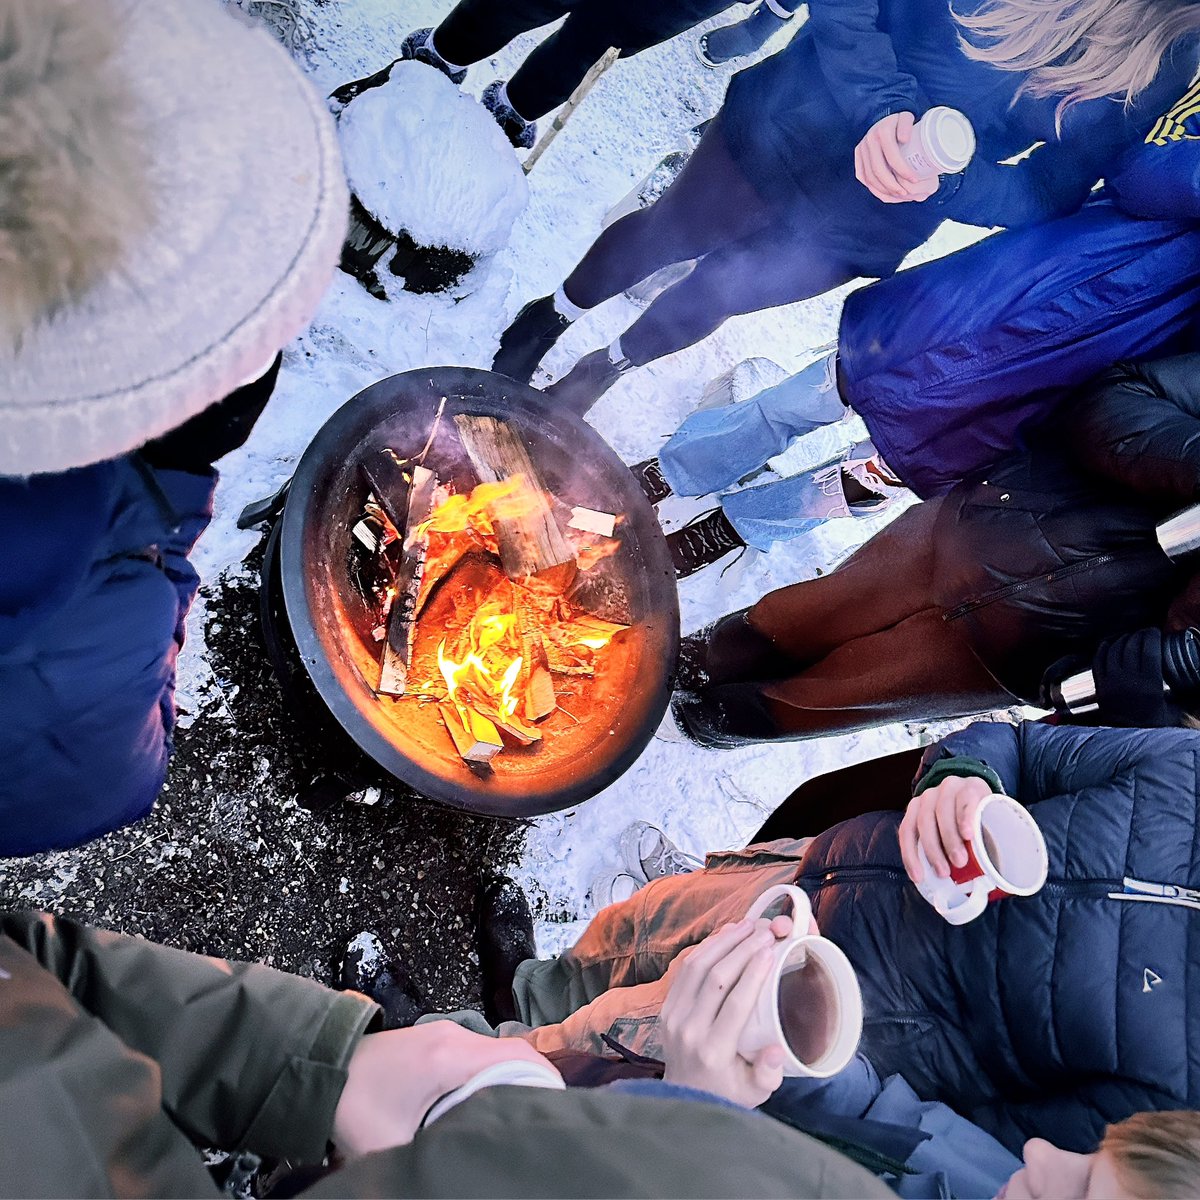 When the snow arrives we head outside for some campfire warmth and hot chocolate. Great morning with Grade 9s sharing stories and preparing for our Winter Camp next month!
#outdoorleadership #thisisourclassroom